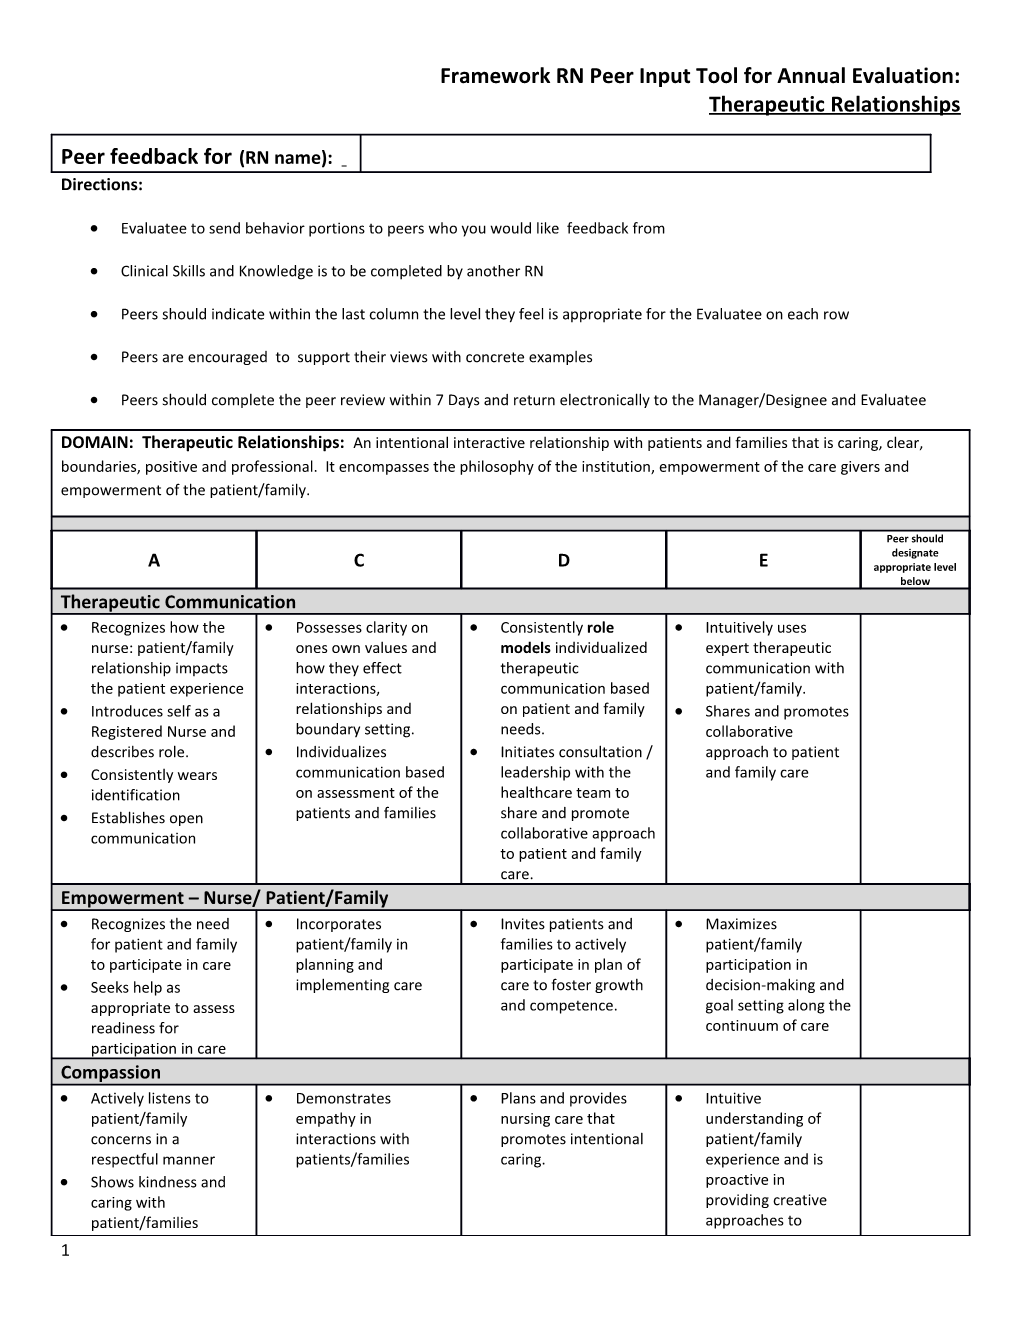 Framework RN Peer Input Tool for Annual Evaluation: Therapeutic Relationships